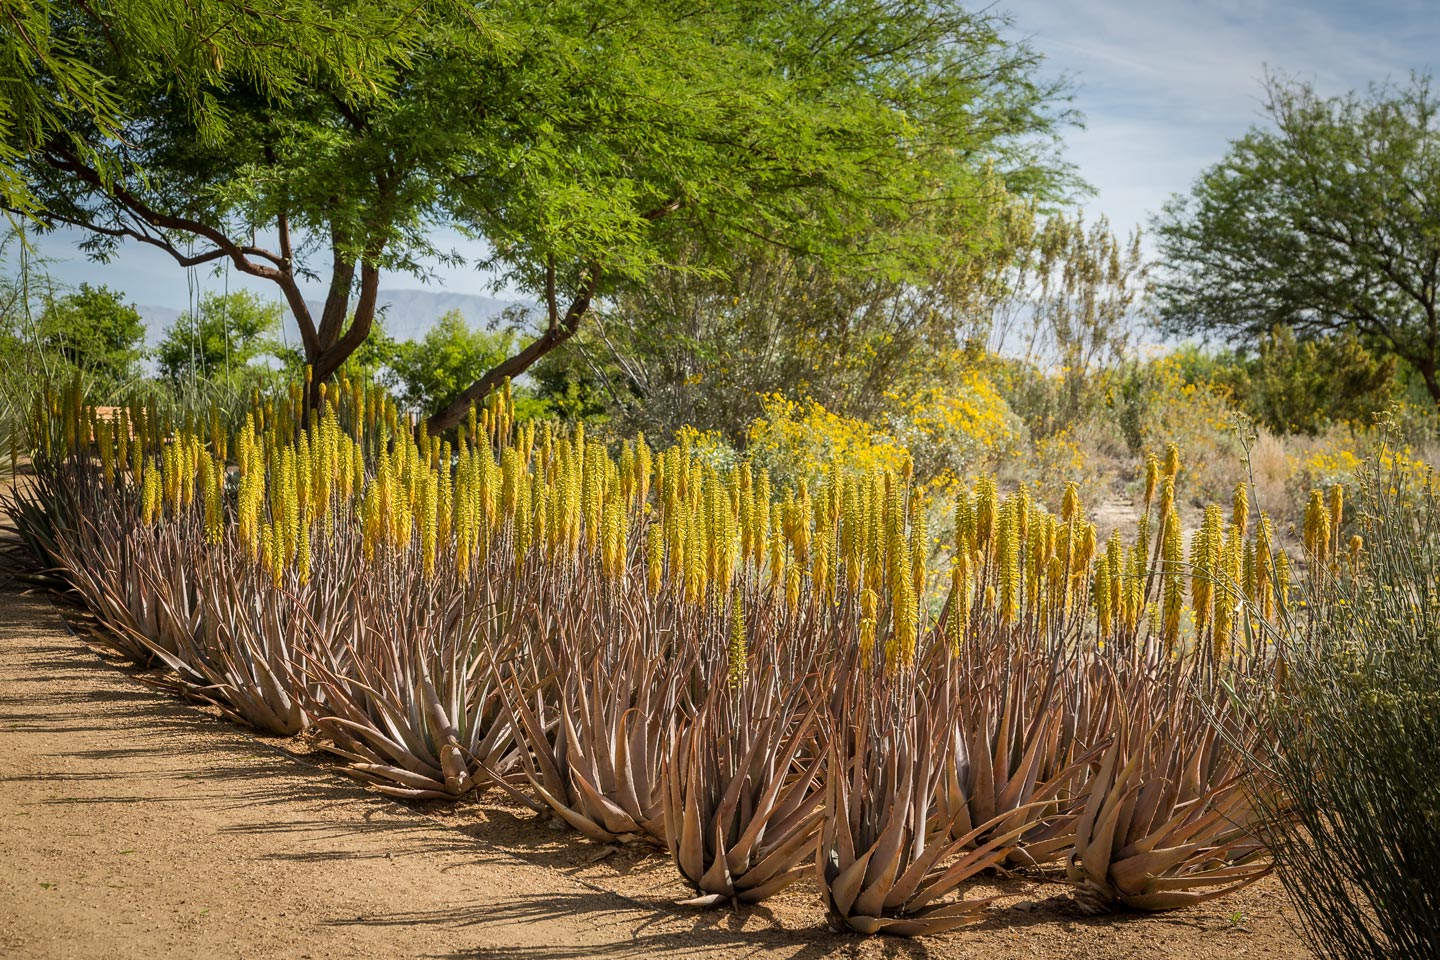 A grouping of Medicinal Aloe bloom under a Mesquite tree at Sunnylands Center and Gardens.